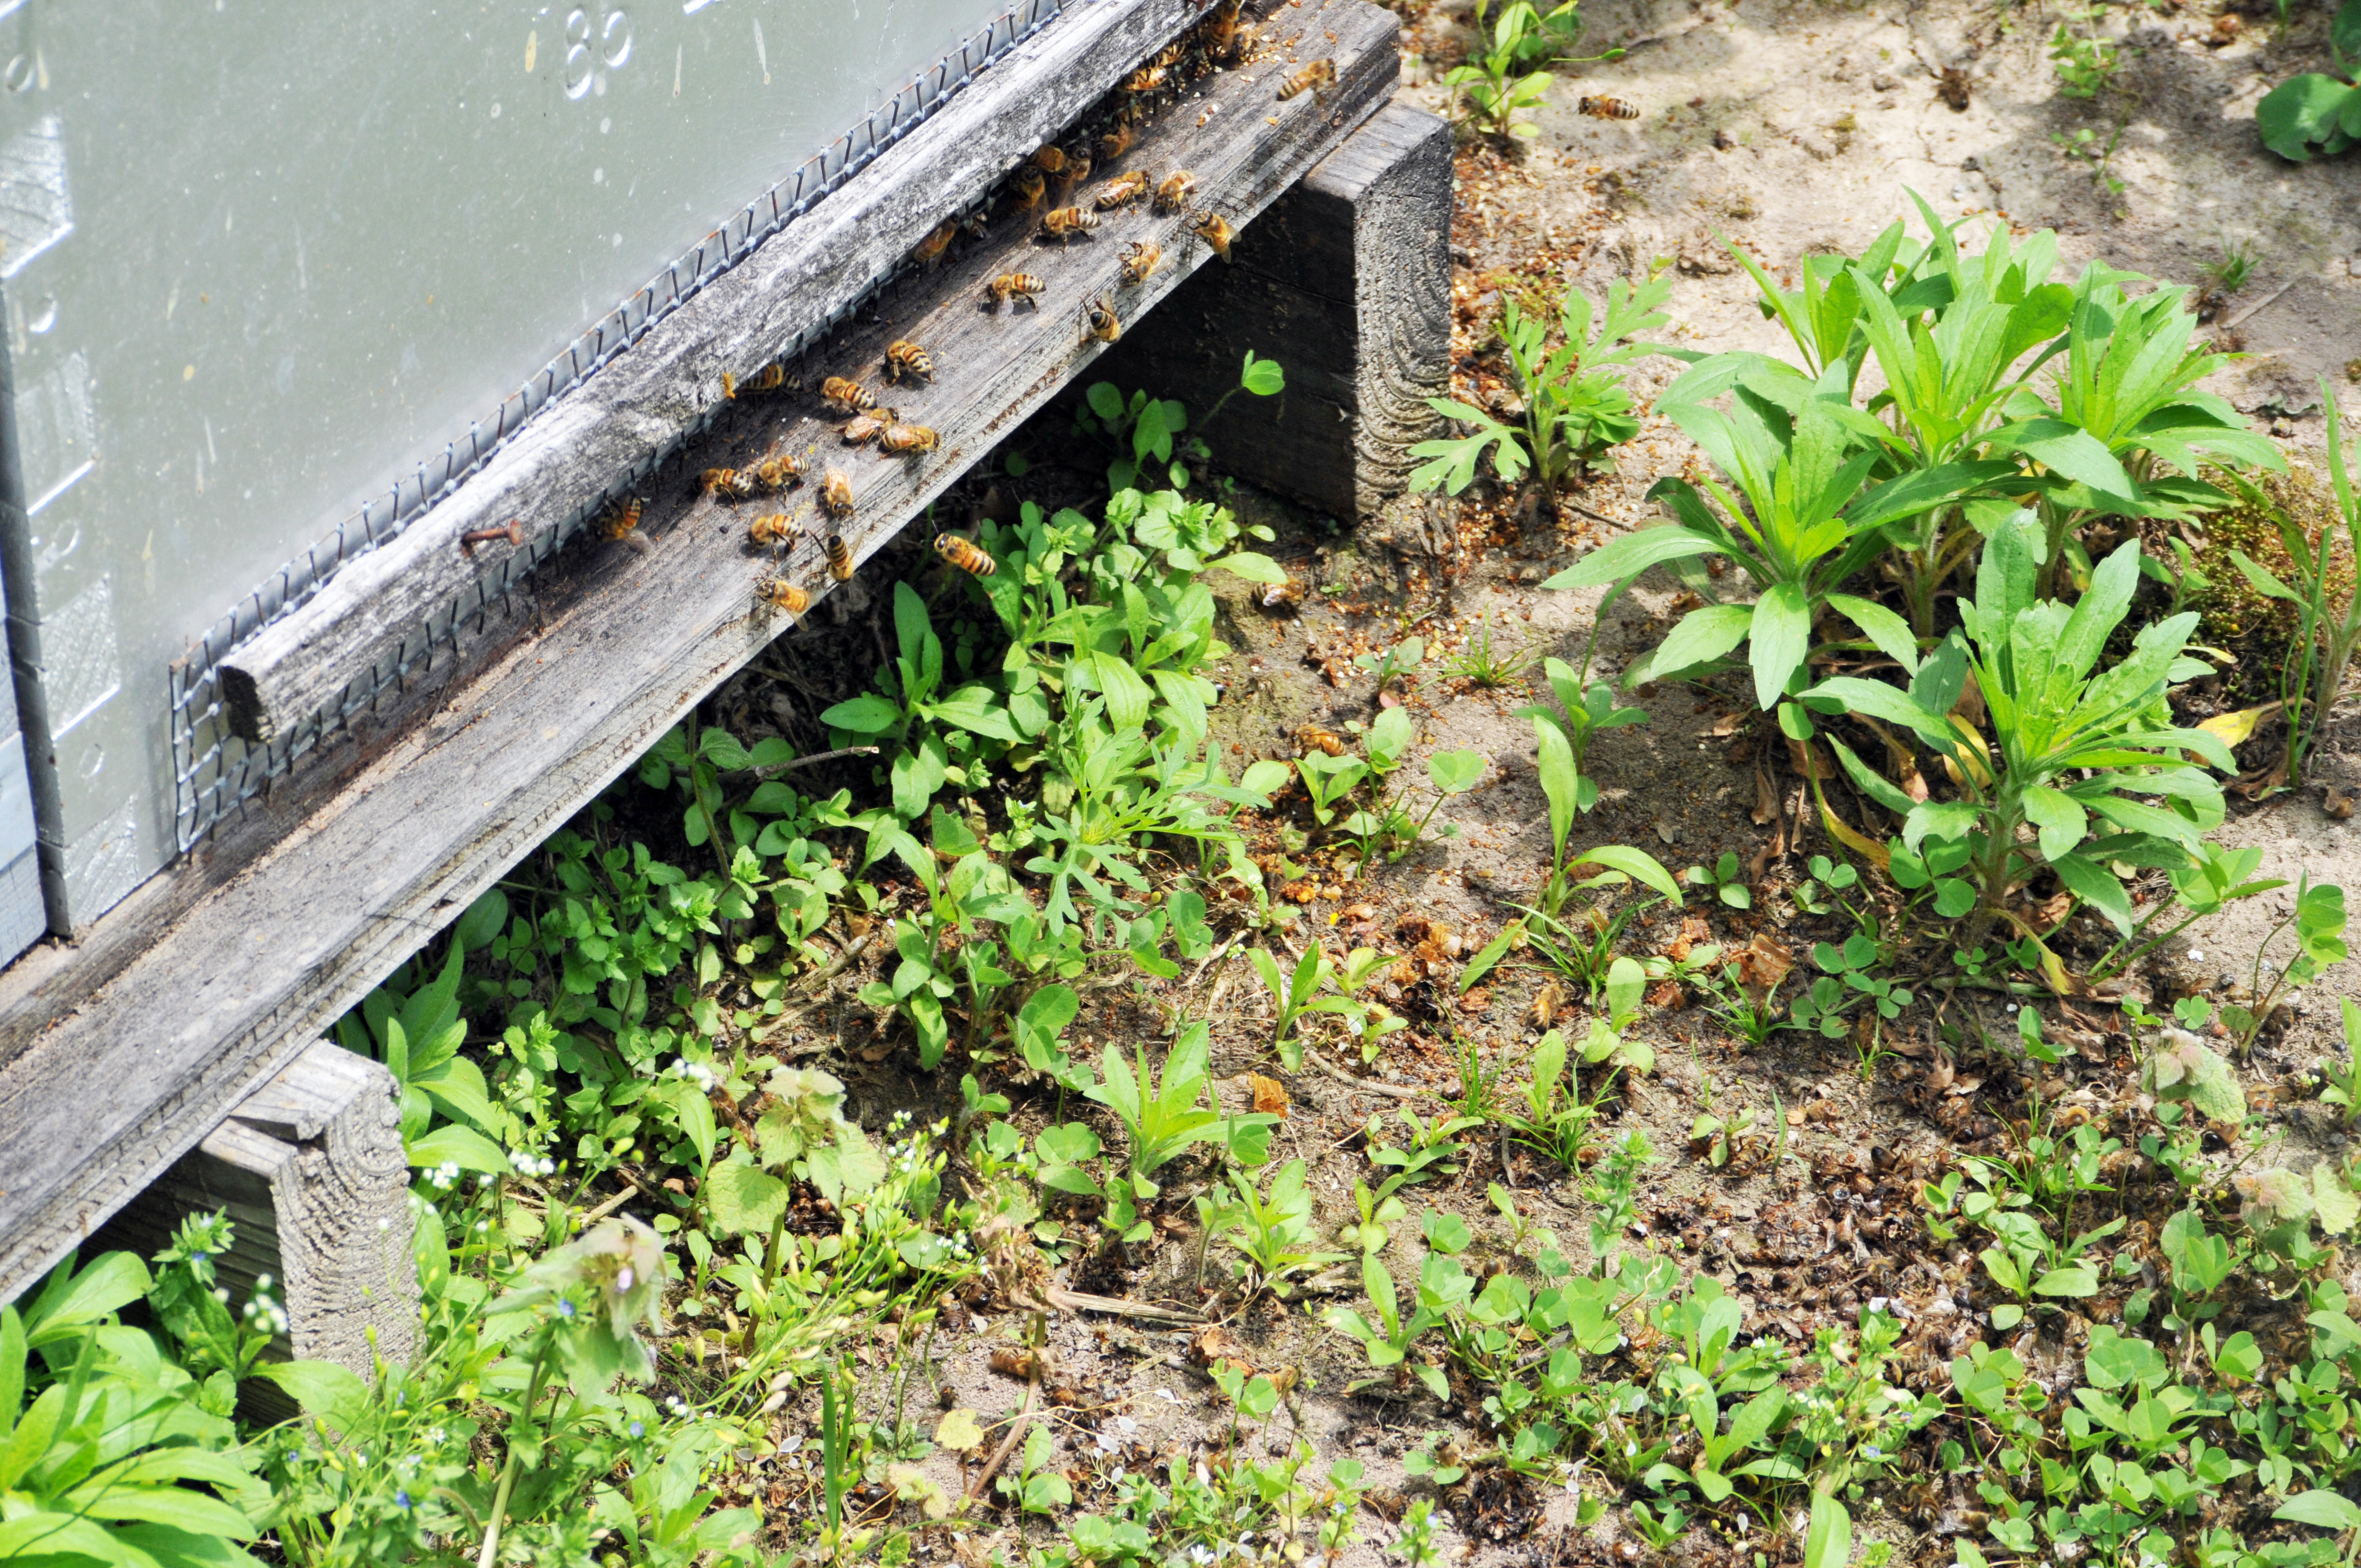 Large numbers of dead and dying bees outside the hive entrance is often due to encounter with pesticides.